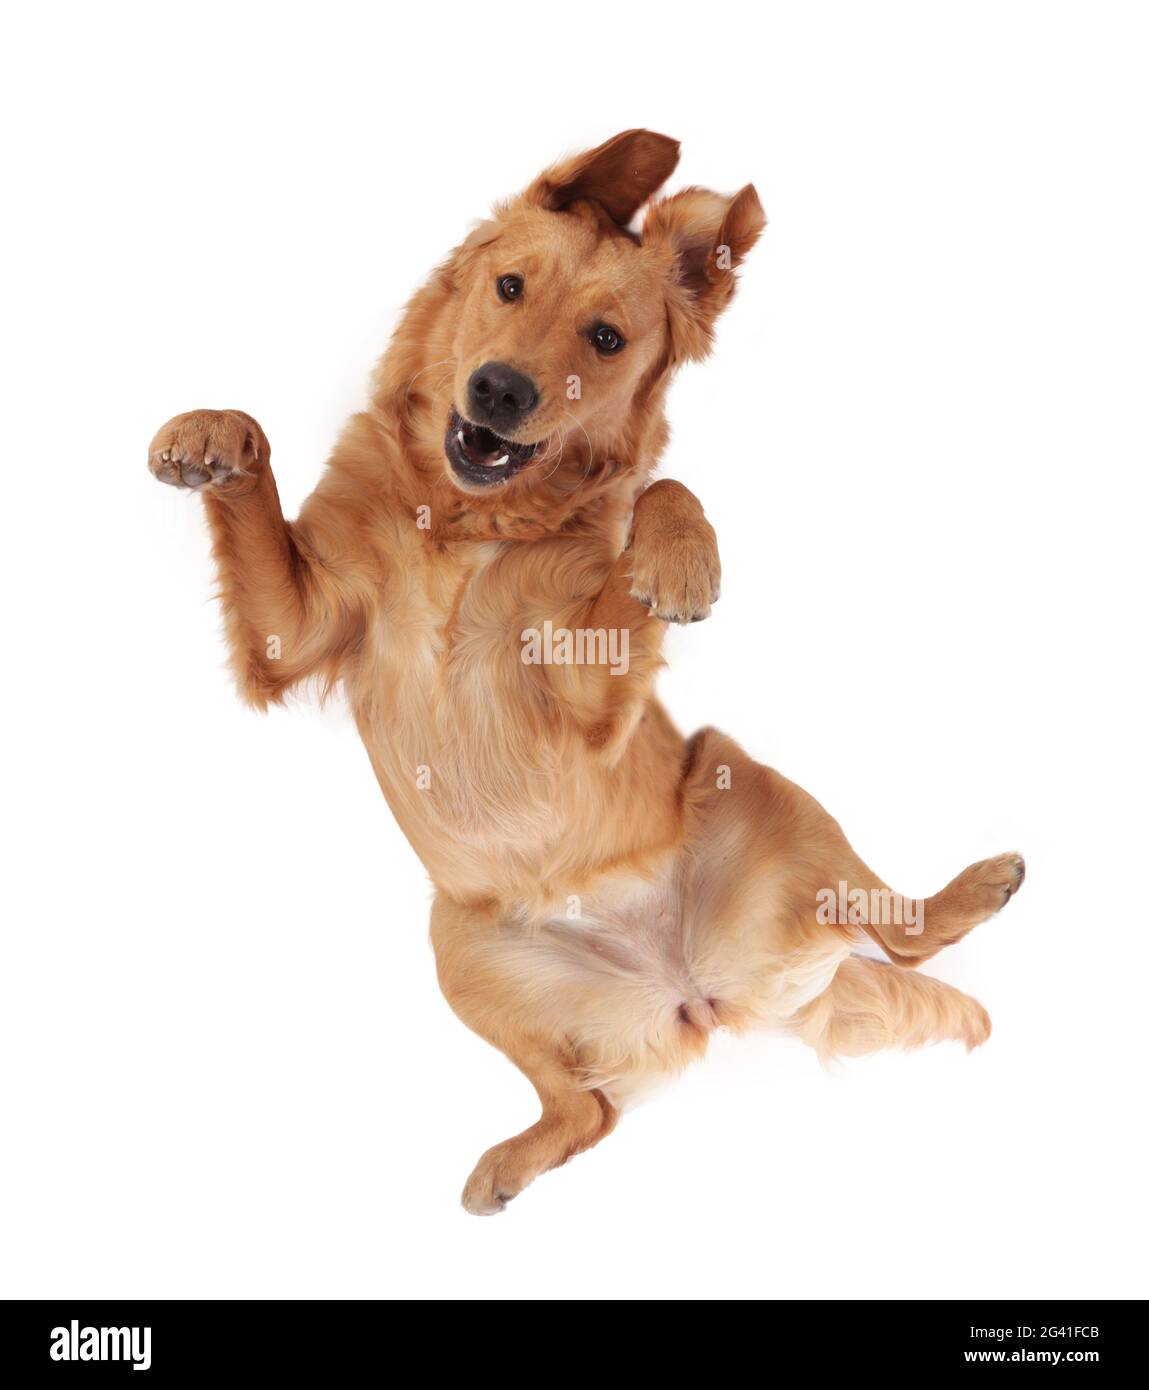 Funny golden retriever dog from above Stock Photo - Alamy